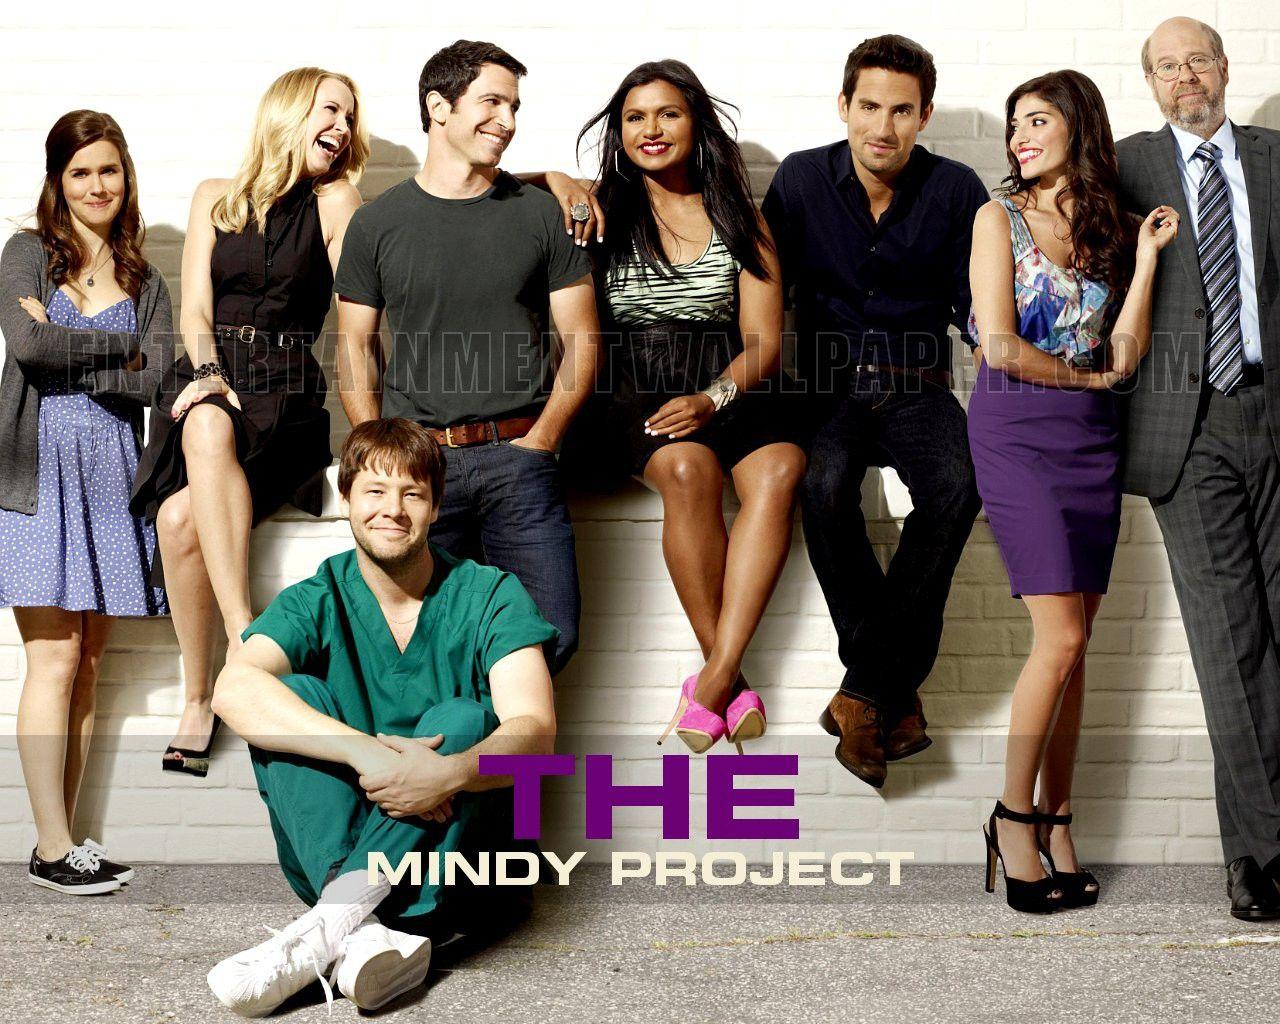 The Mindy Project Wallpaper. TV SHOWS & CHARACTERS